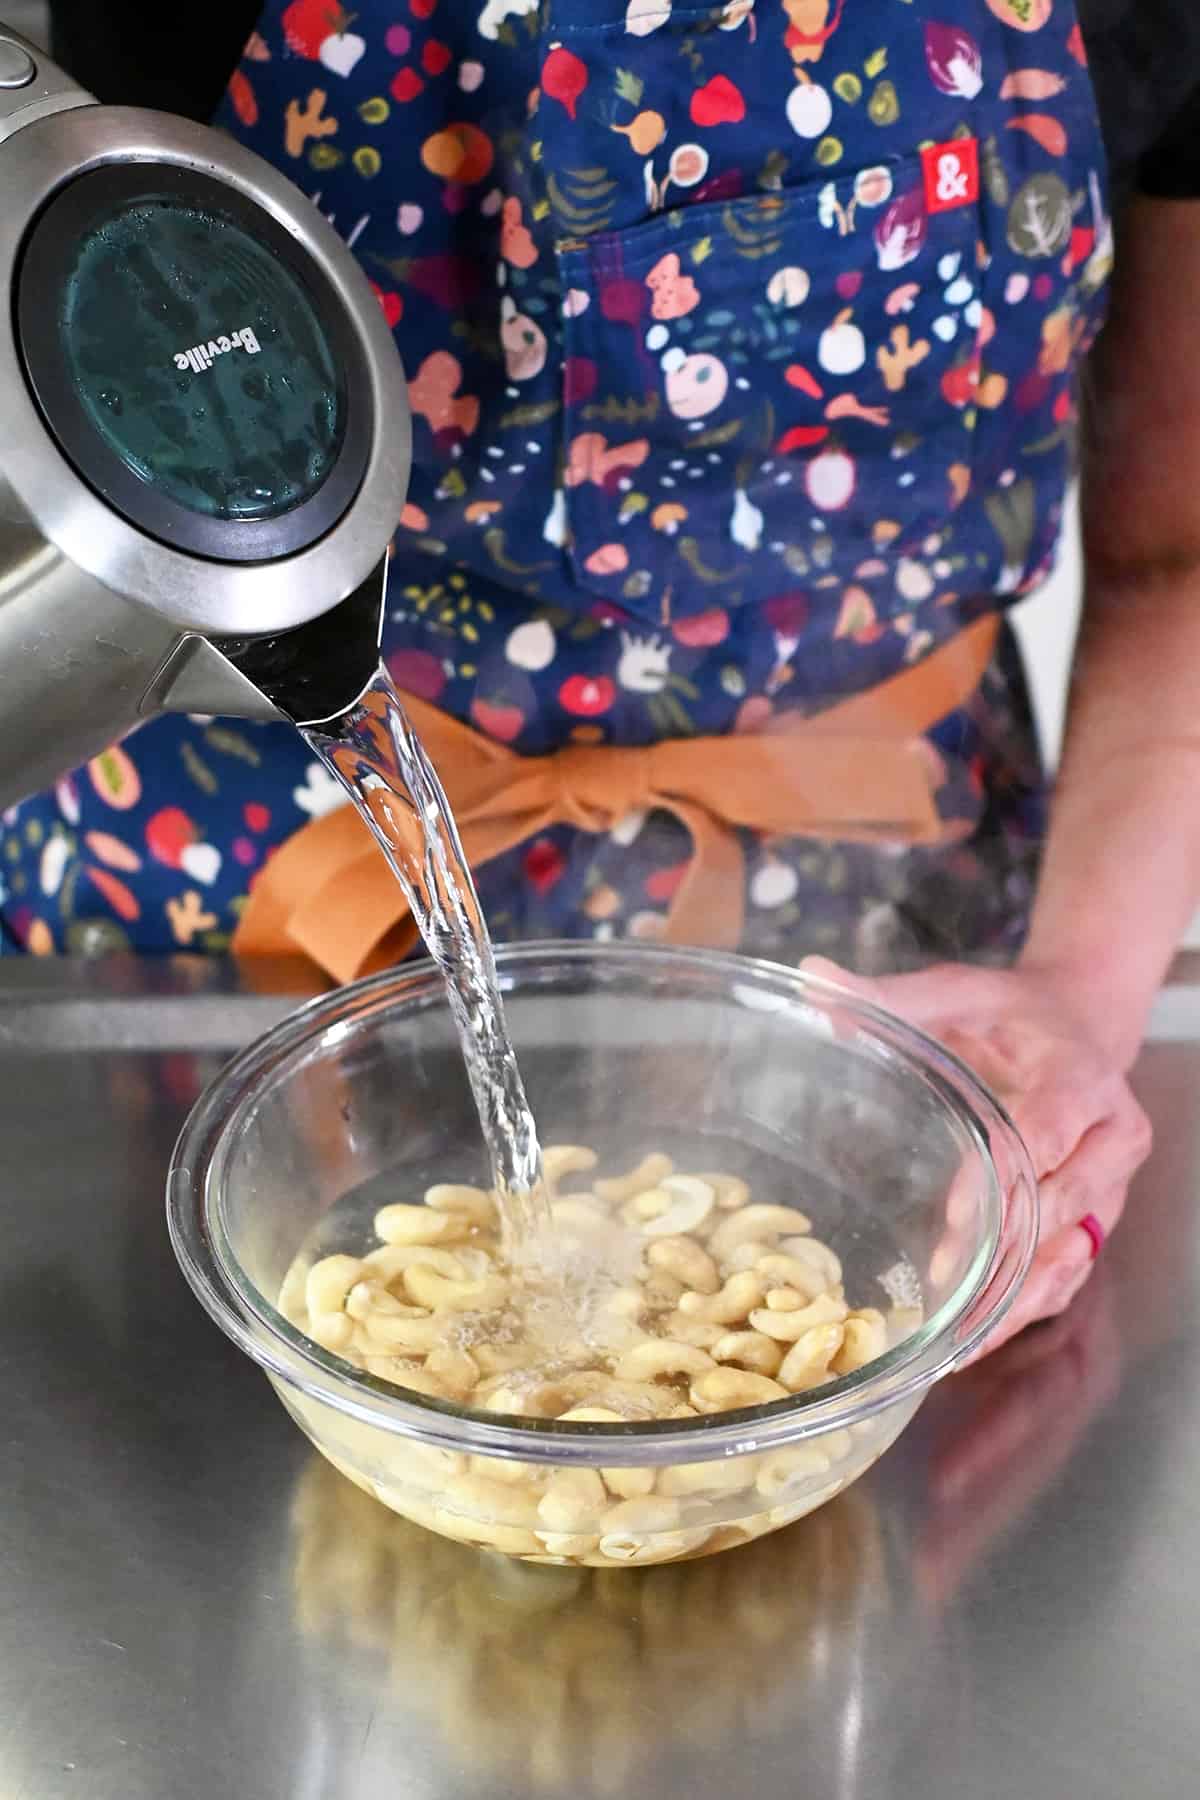 Pouring boiling water from an electric kettle into a clear glass bowl with raw cashews.